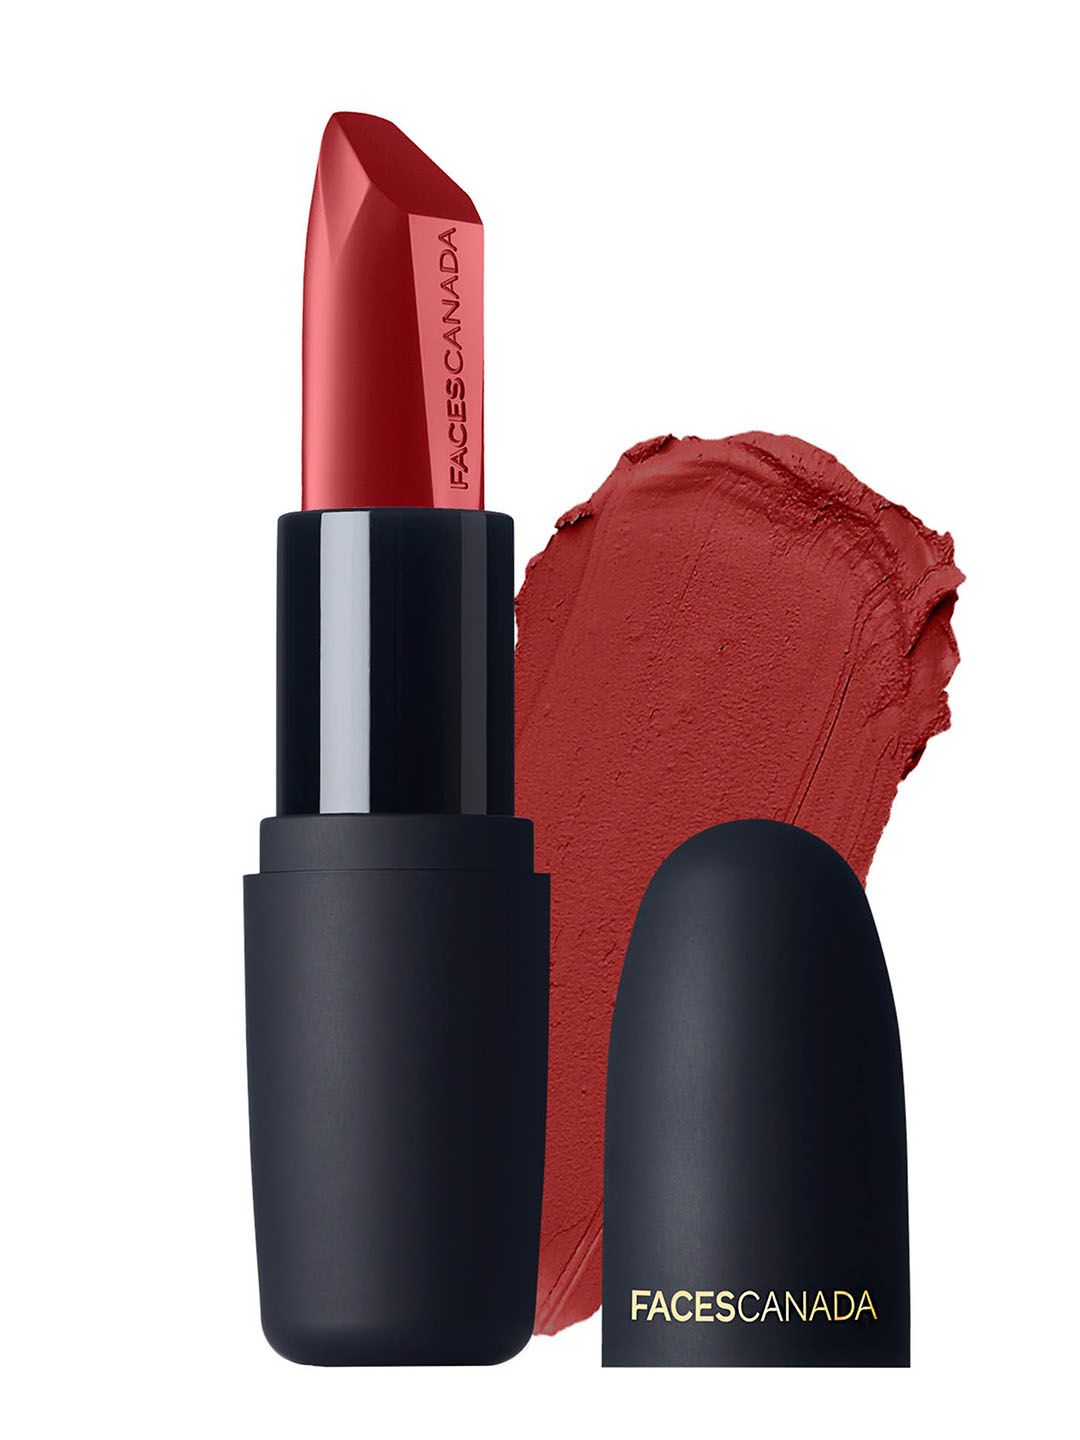 Faces Canada Weightless Matte Hydrating Lipstick with Almond Oil - Red Cider 28 Price in India